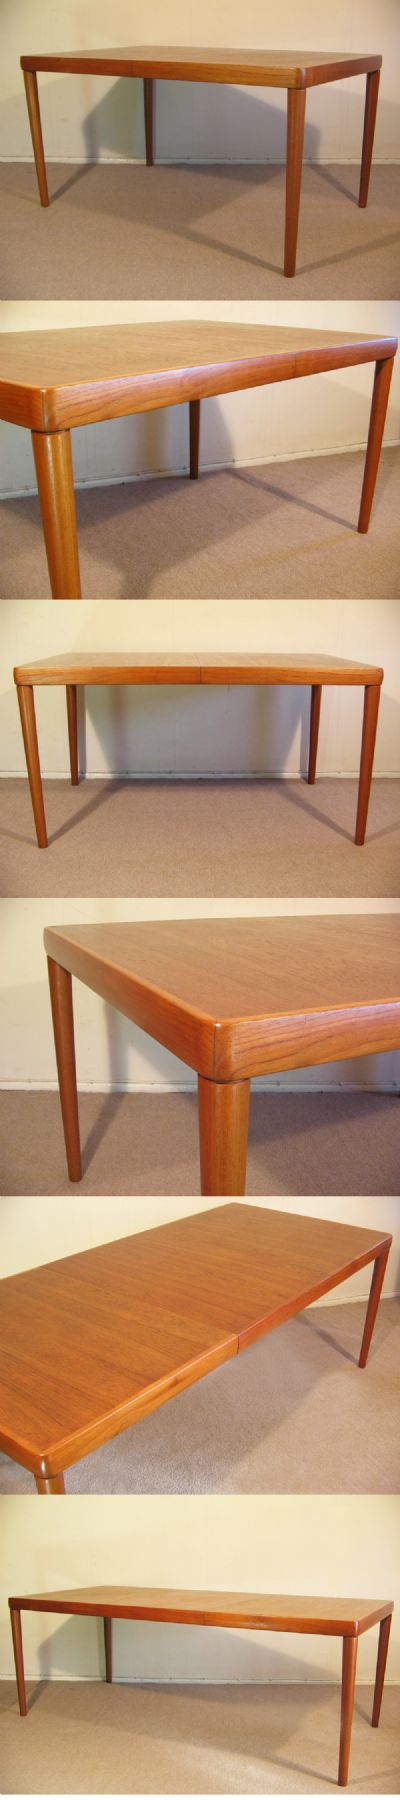 A teak extending table c1970s, by Bramin of Denmark. Extends via single central leaf. An impressive table with lovely leg detail. Seats eight.